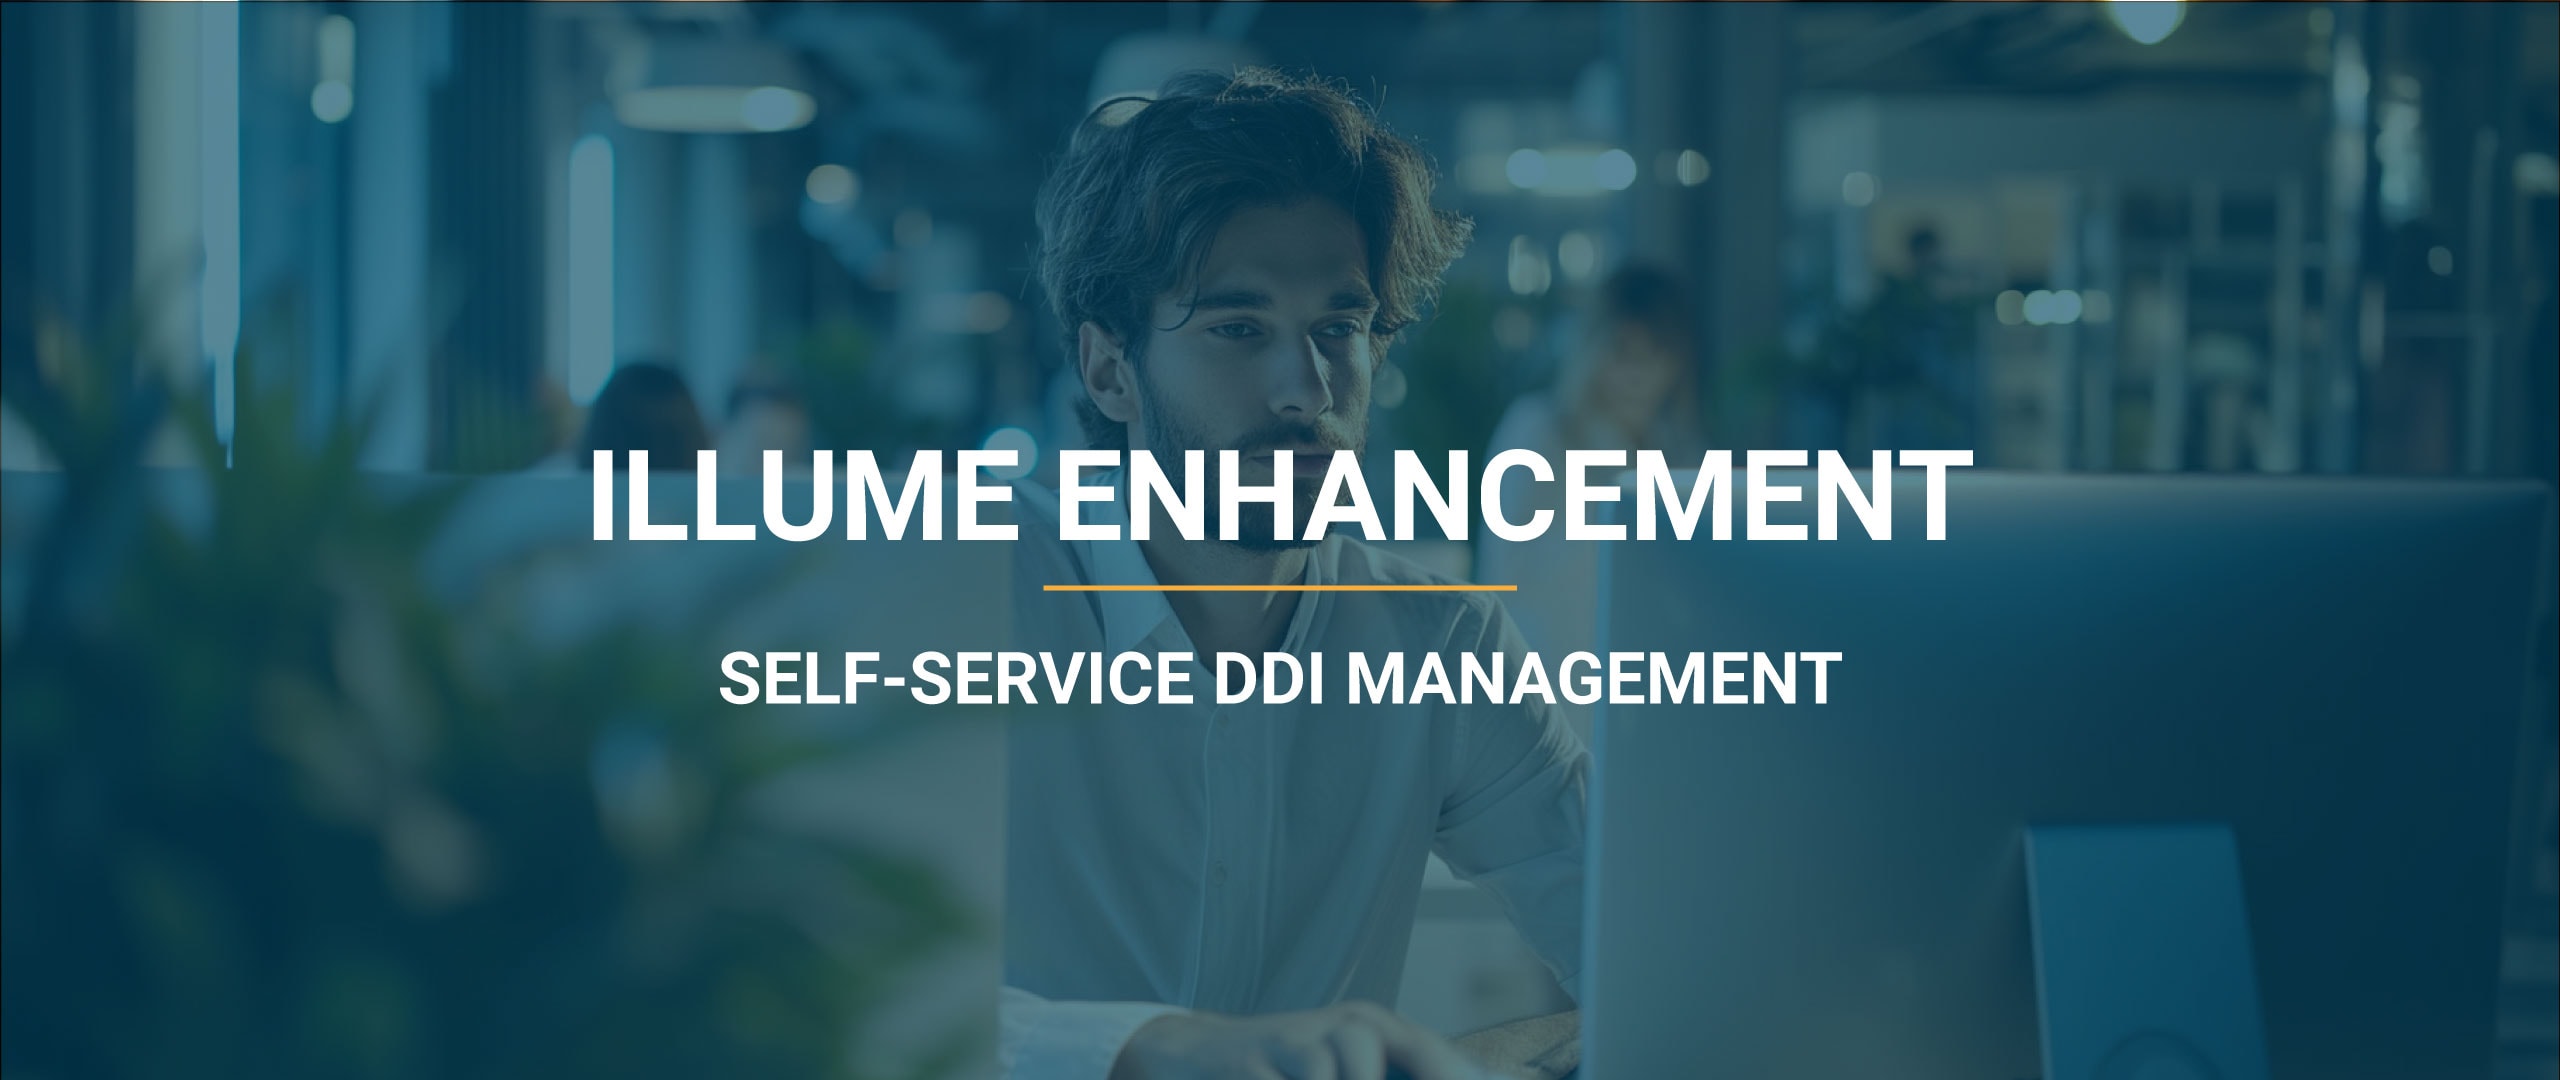 Introducing Self-Service DDI Management: Enhancement to self-service voice in our Partner Portal Illume